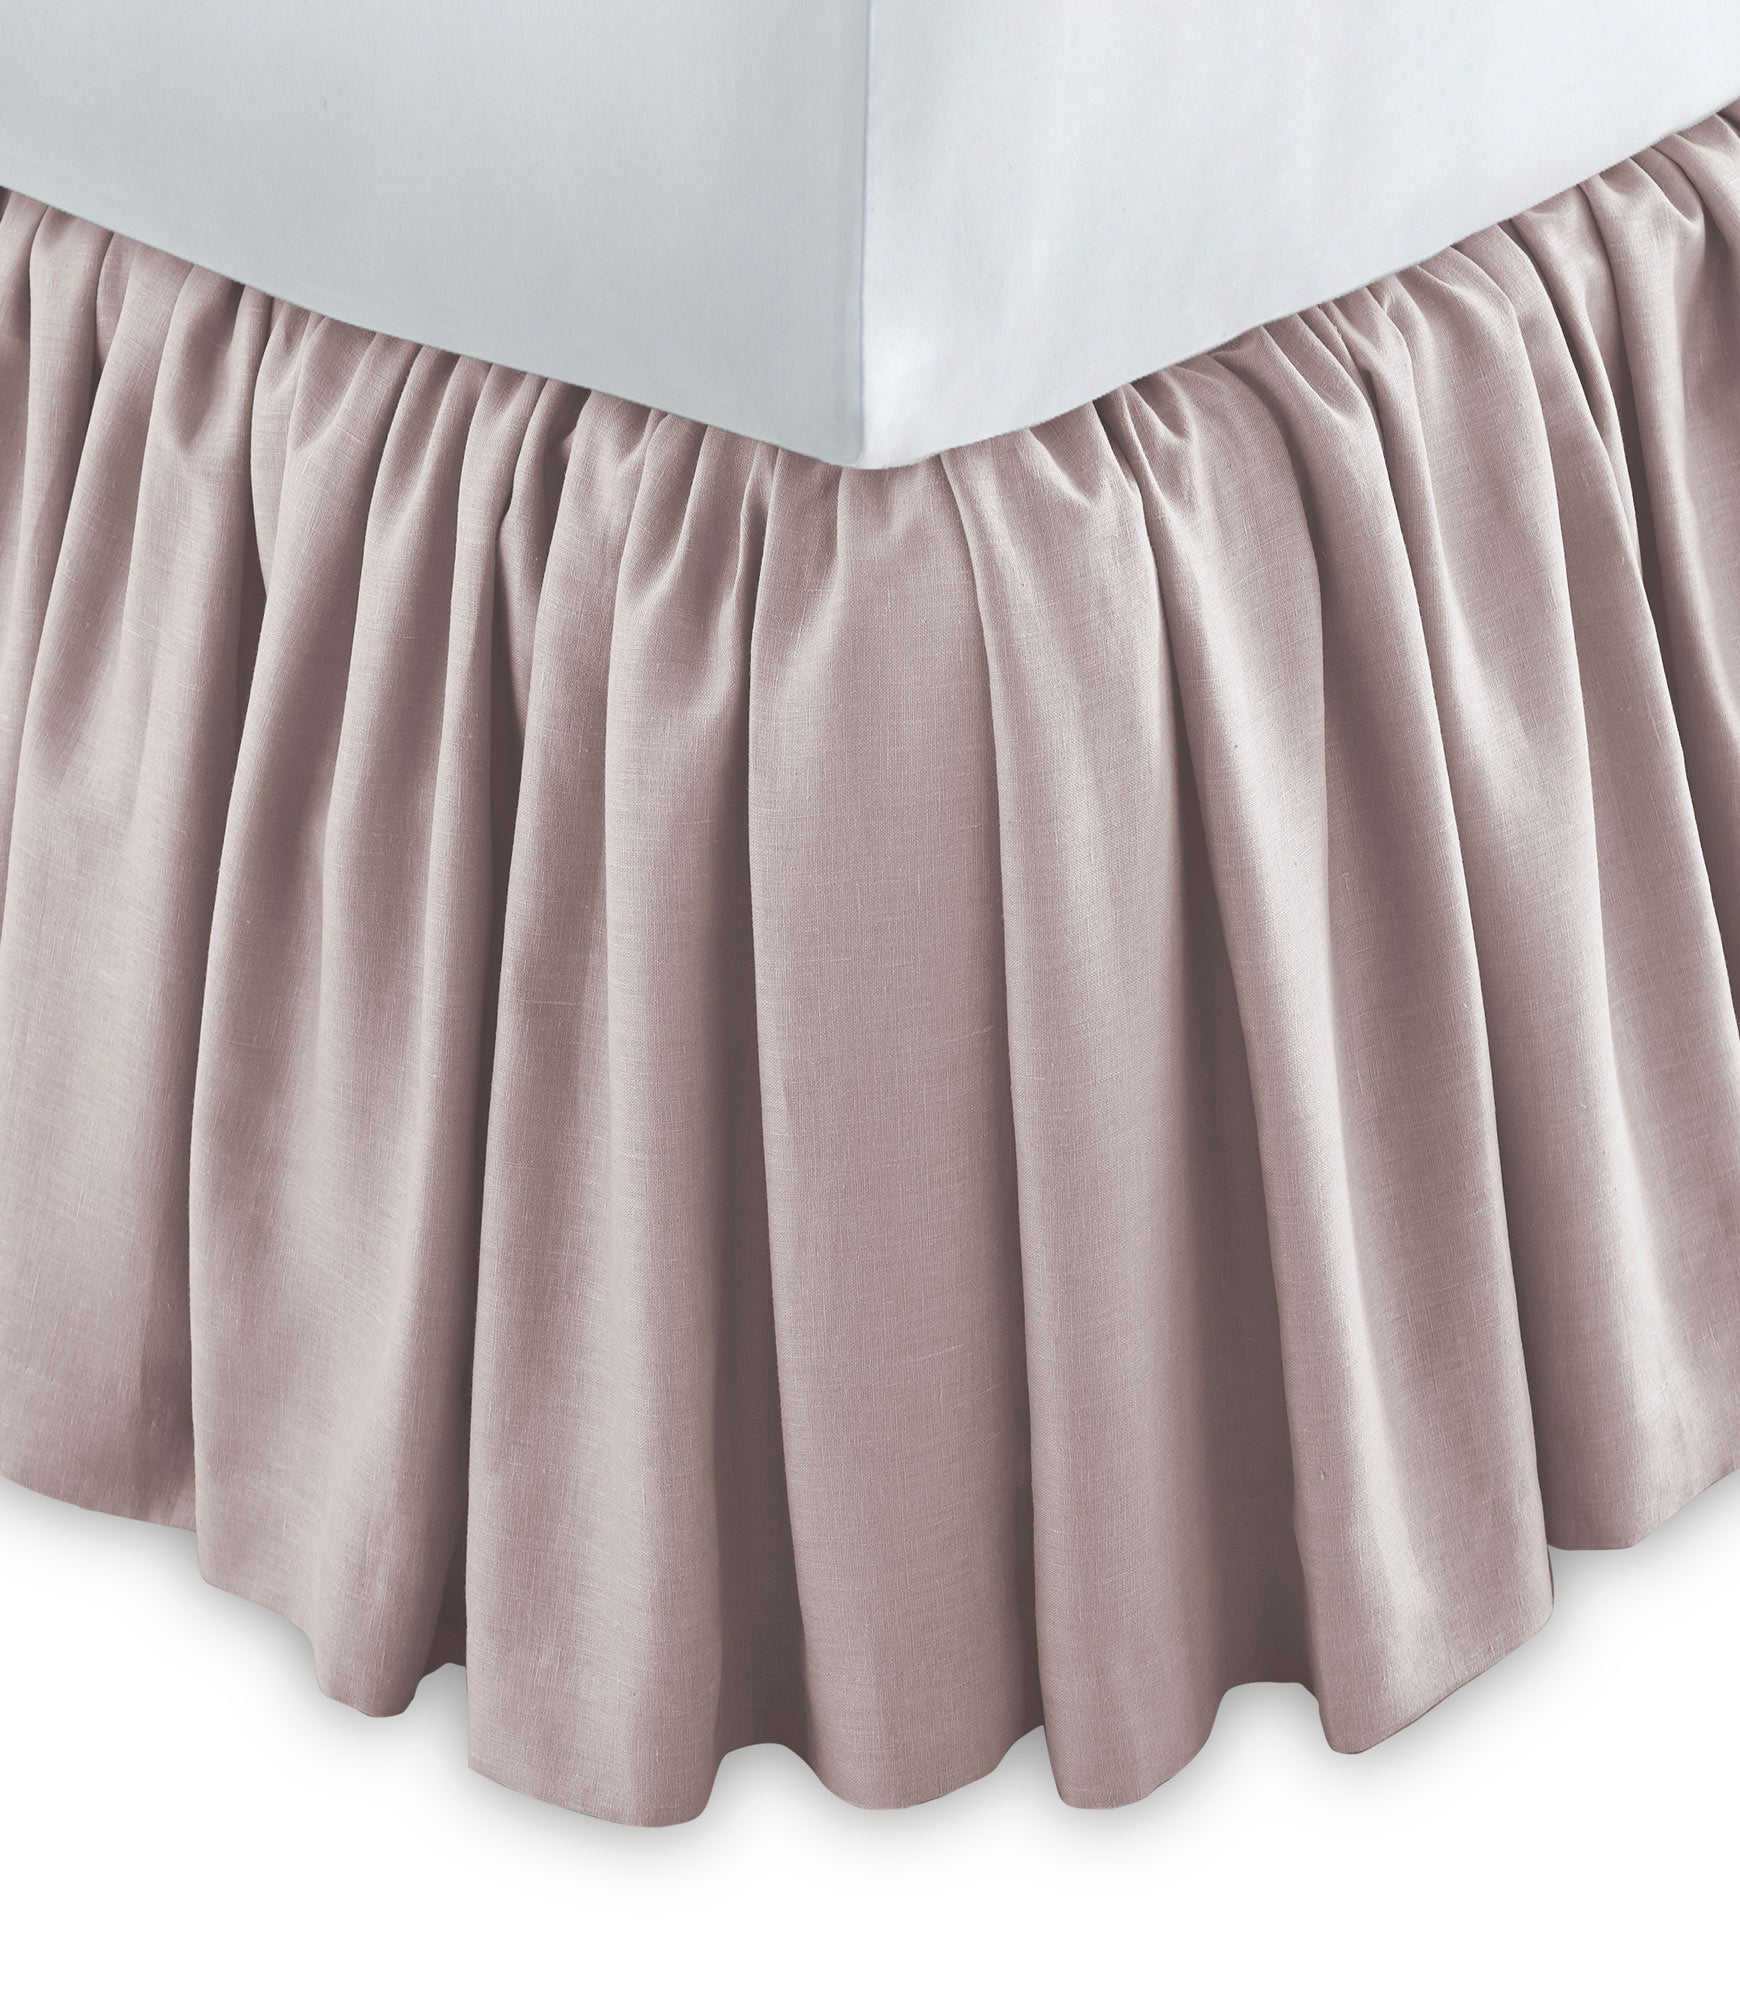 White Linen Bed Skirt- Gathered with Country Ruffle Hem